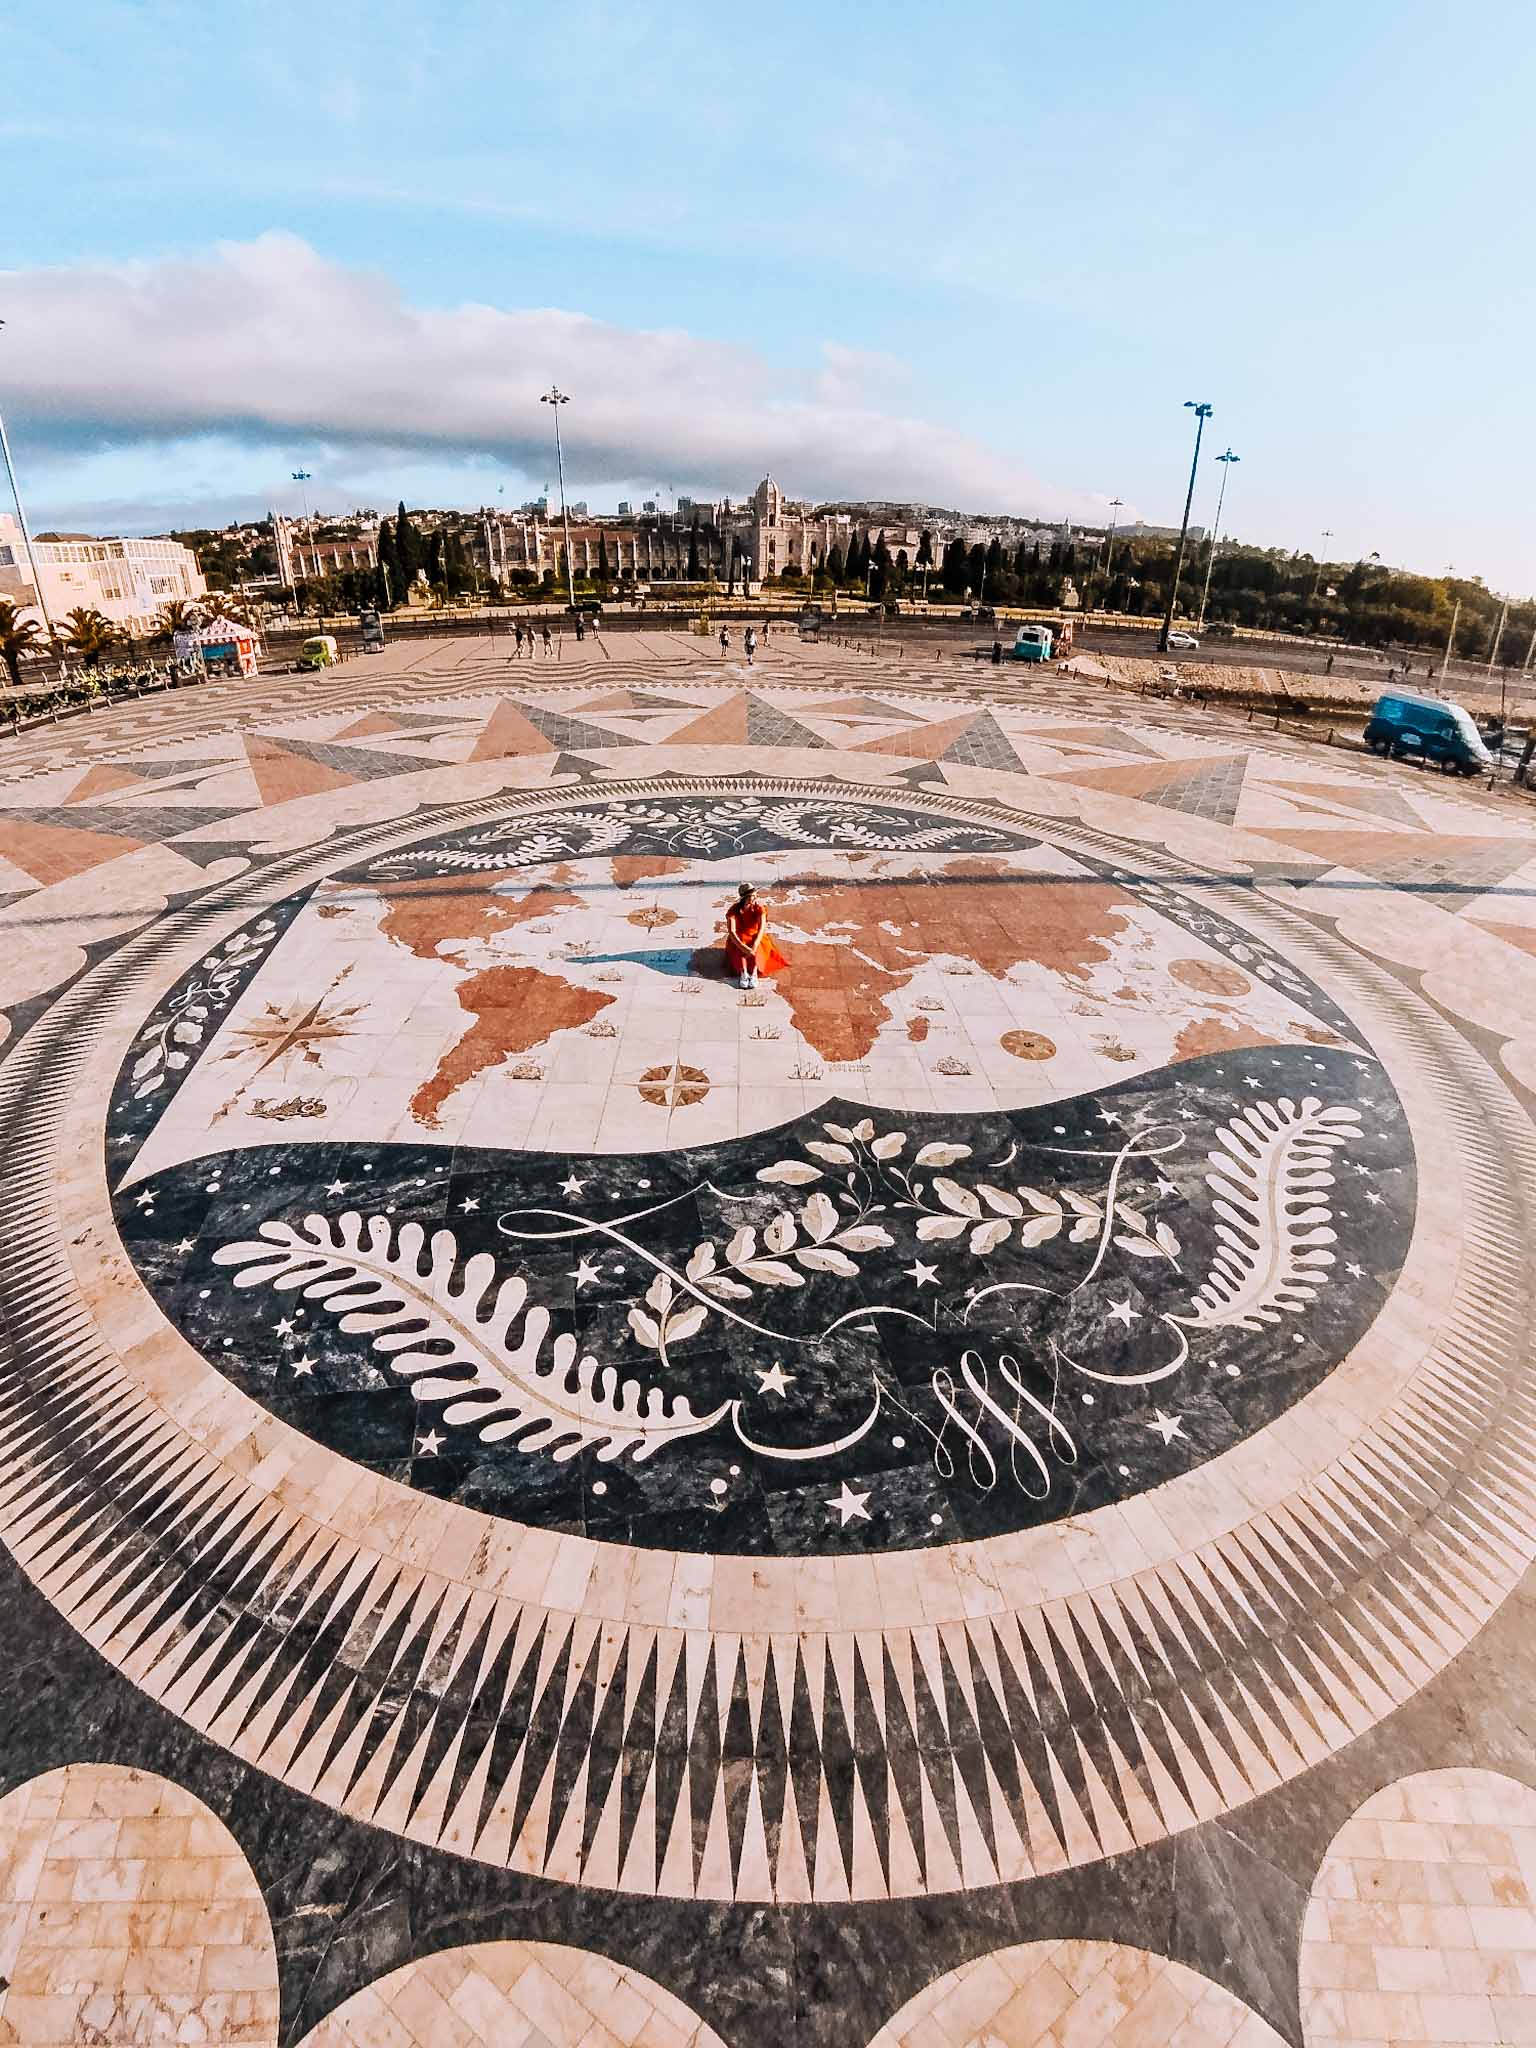 Best Instagram photo spots in Lisbon, Portugal - Monument of the Discoveries and Compass Rose